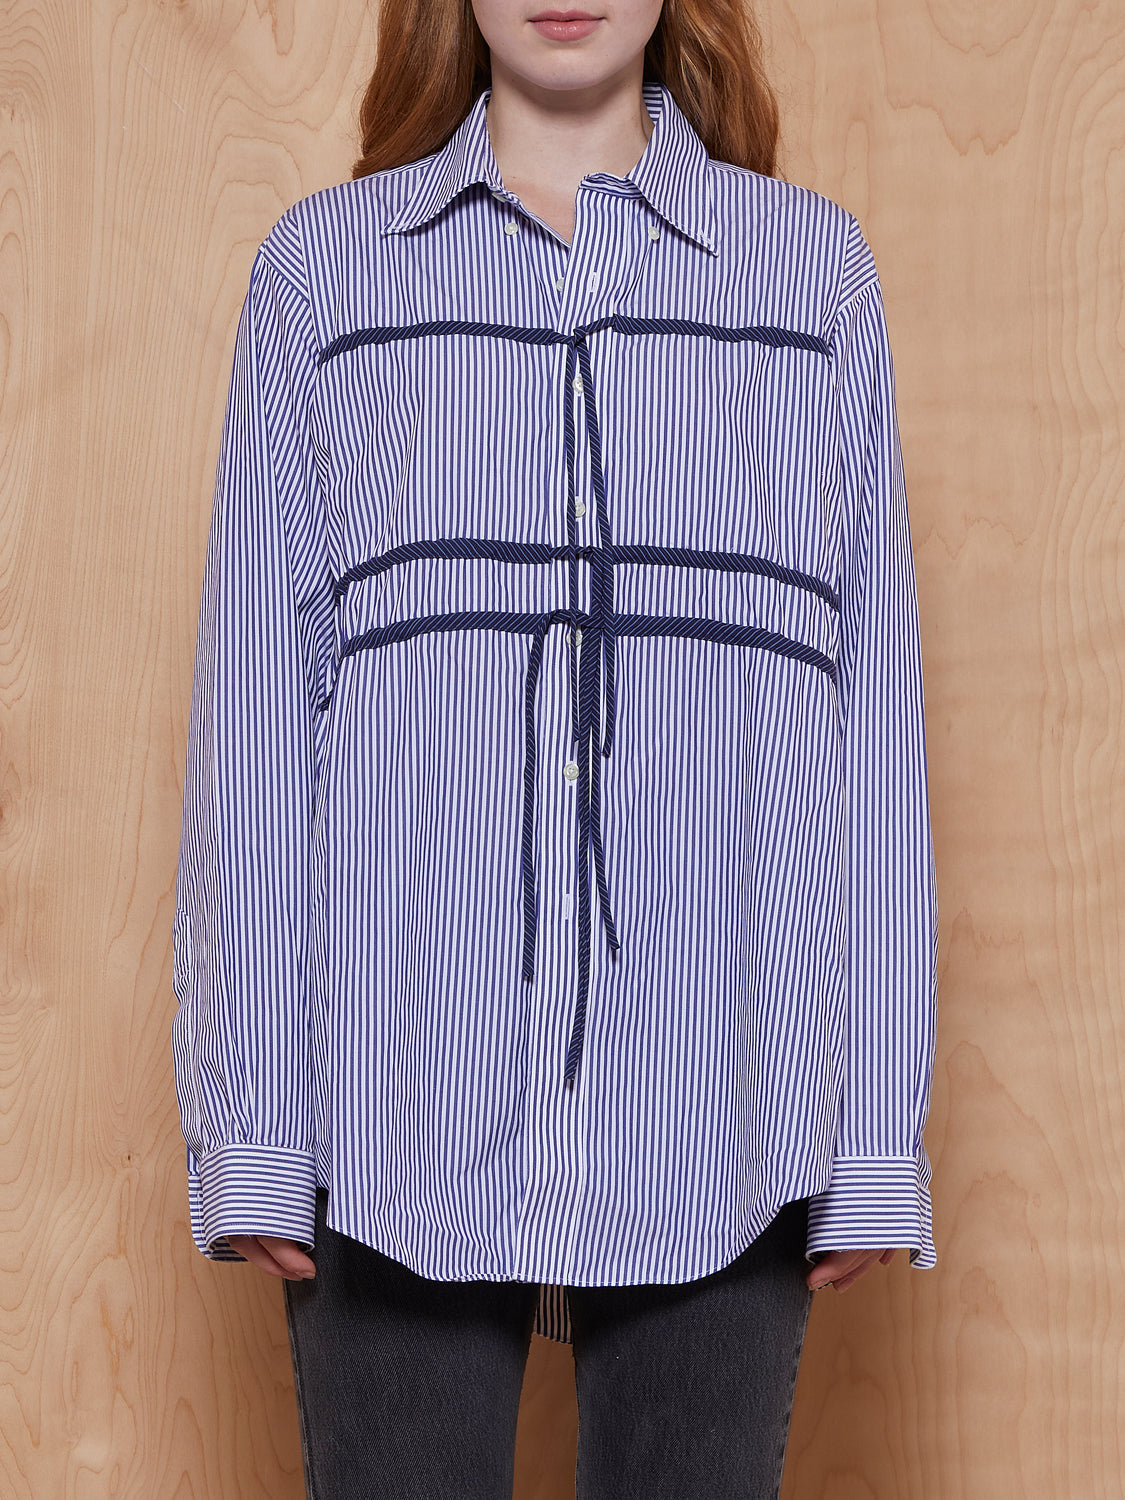 Sibling Striped Button Down with Ties